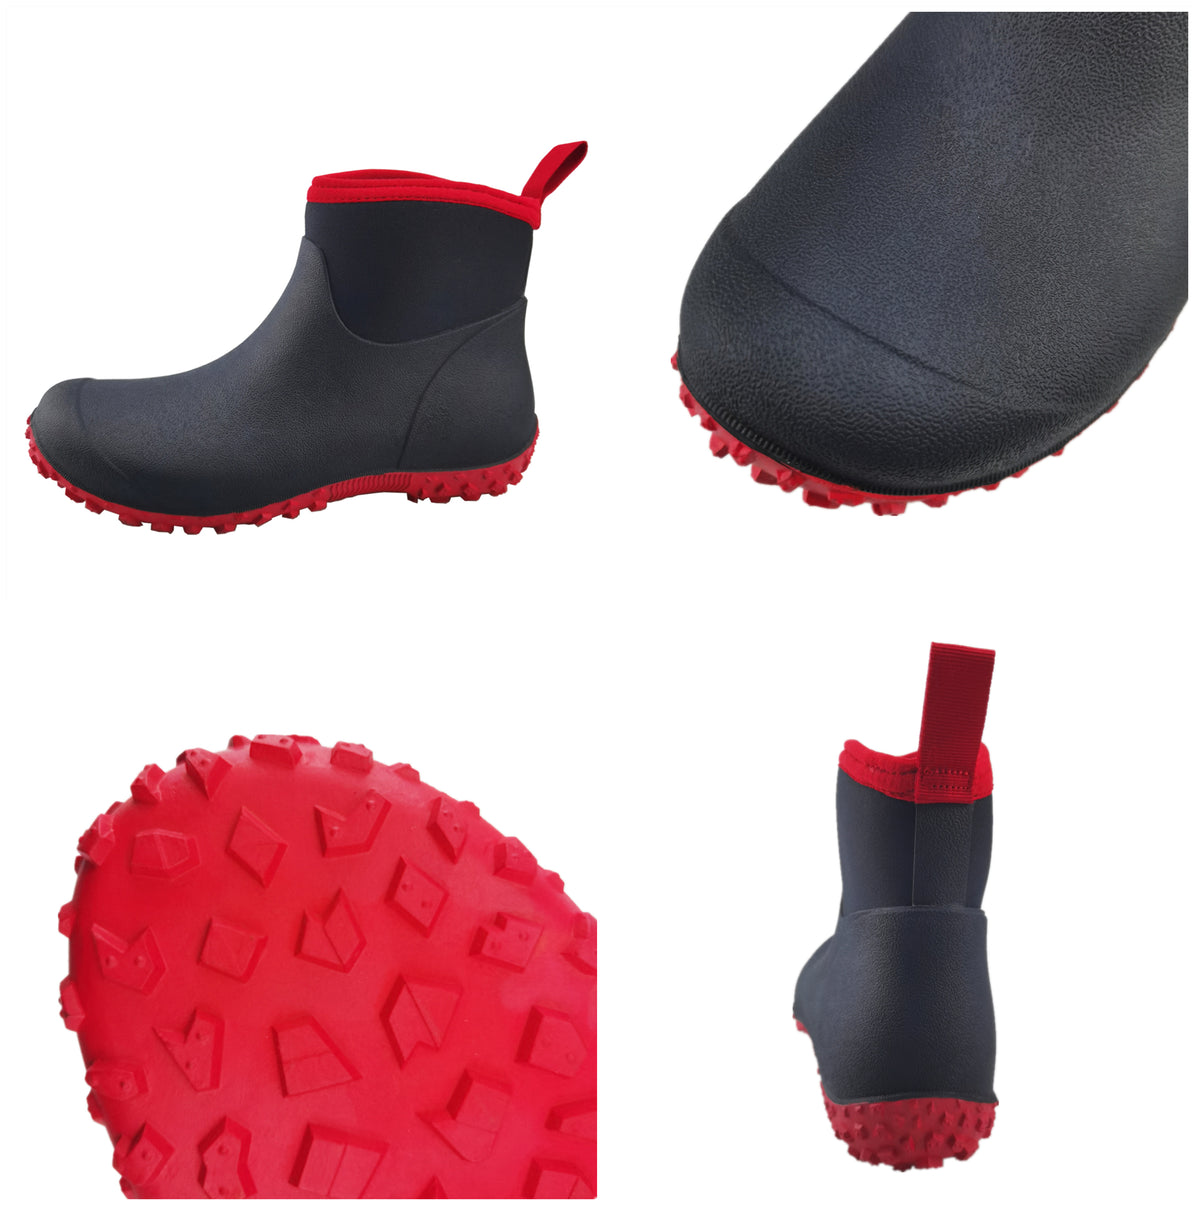 SYLPHID Rubber Boots for Women Waterproof